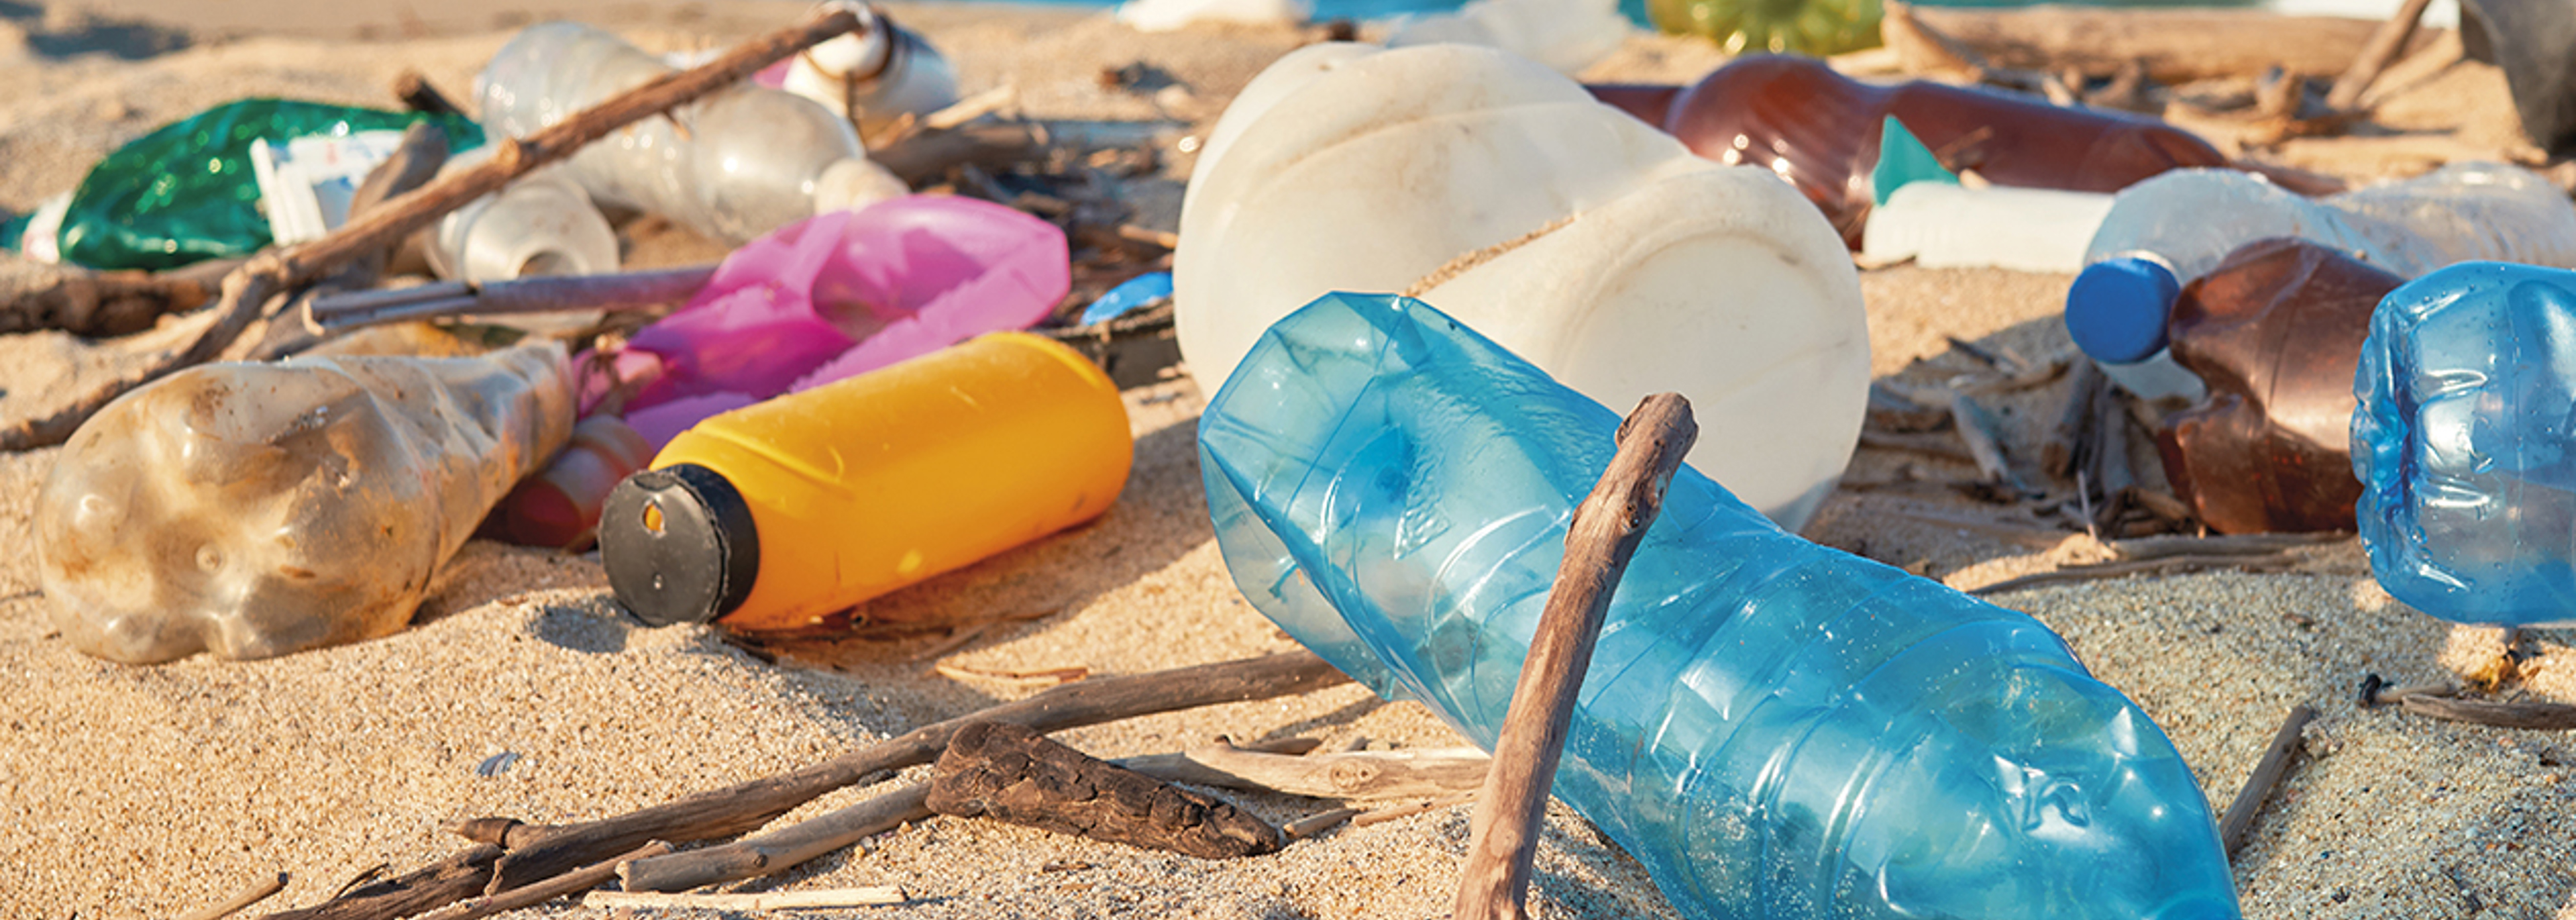 Legal briefing: A clear directive on plastics